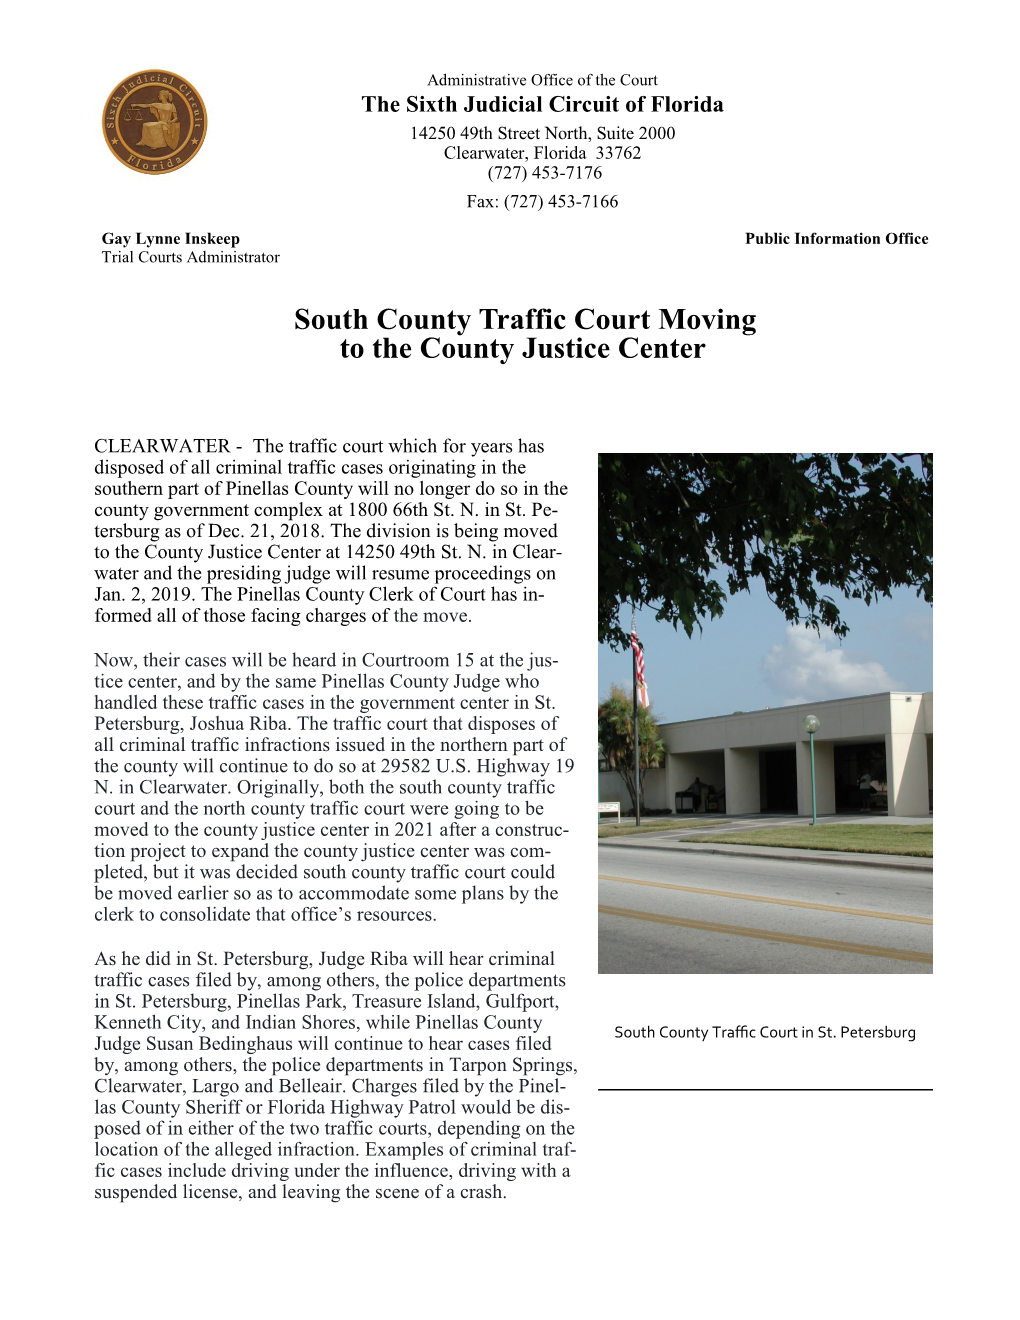 South County Traffic Court Moving to the County Justice Center